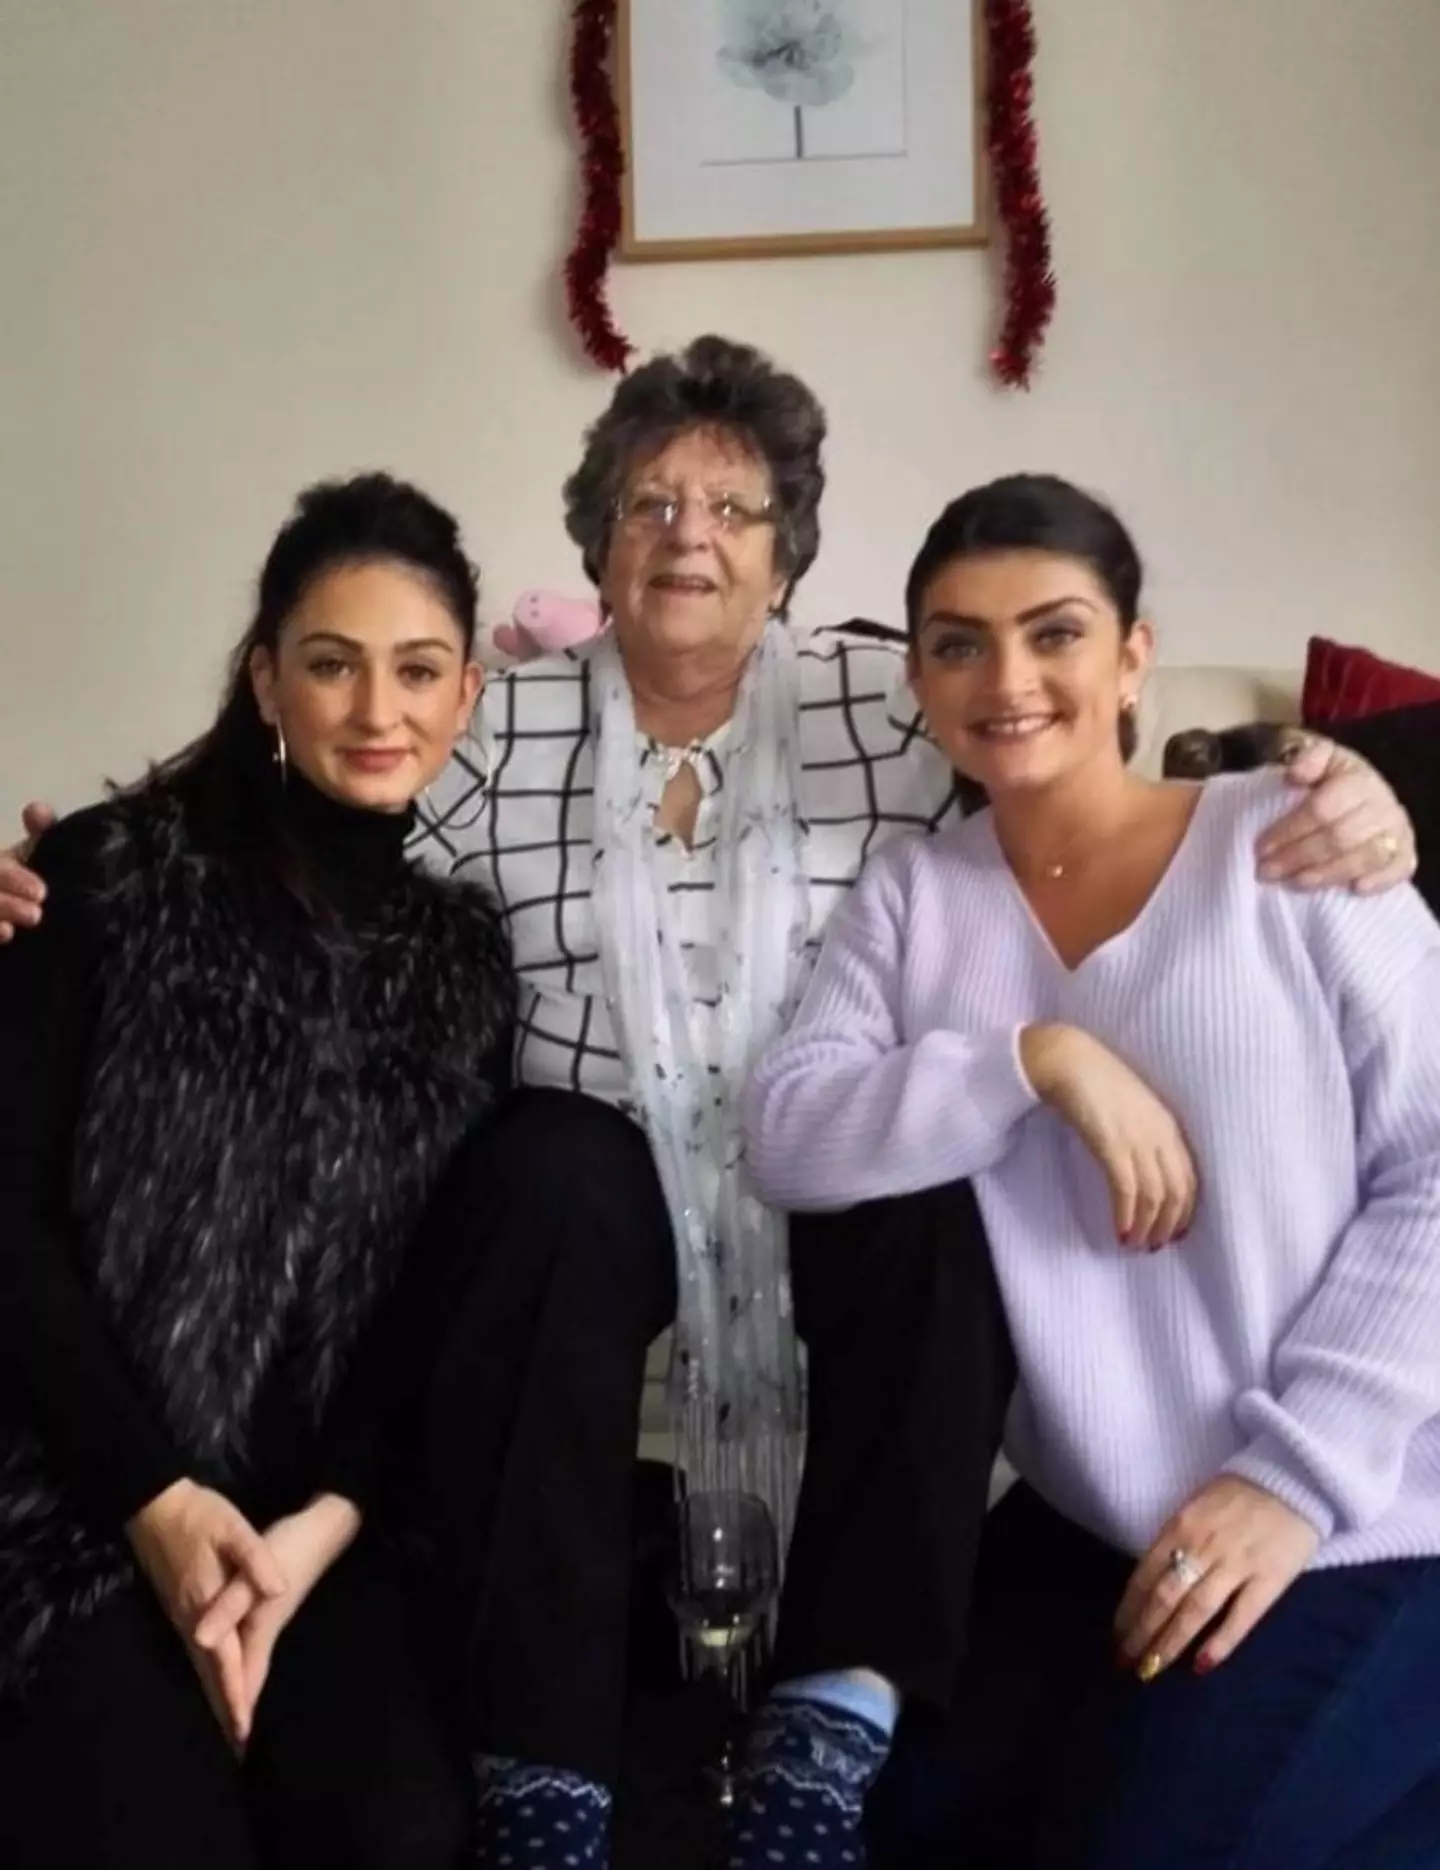 Katie and Abbie Rogers with their gran, Sylvia.